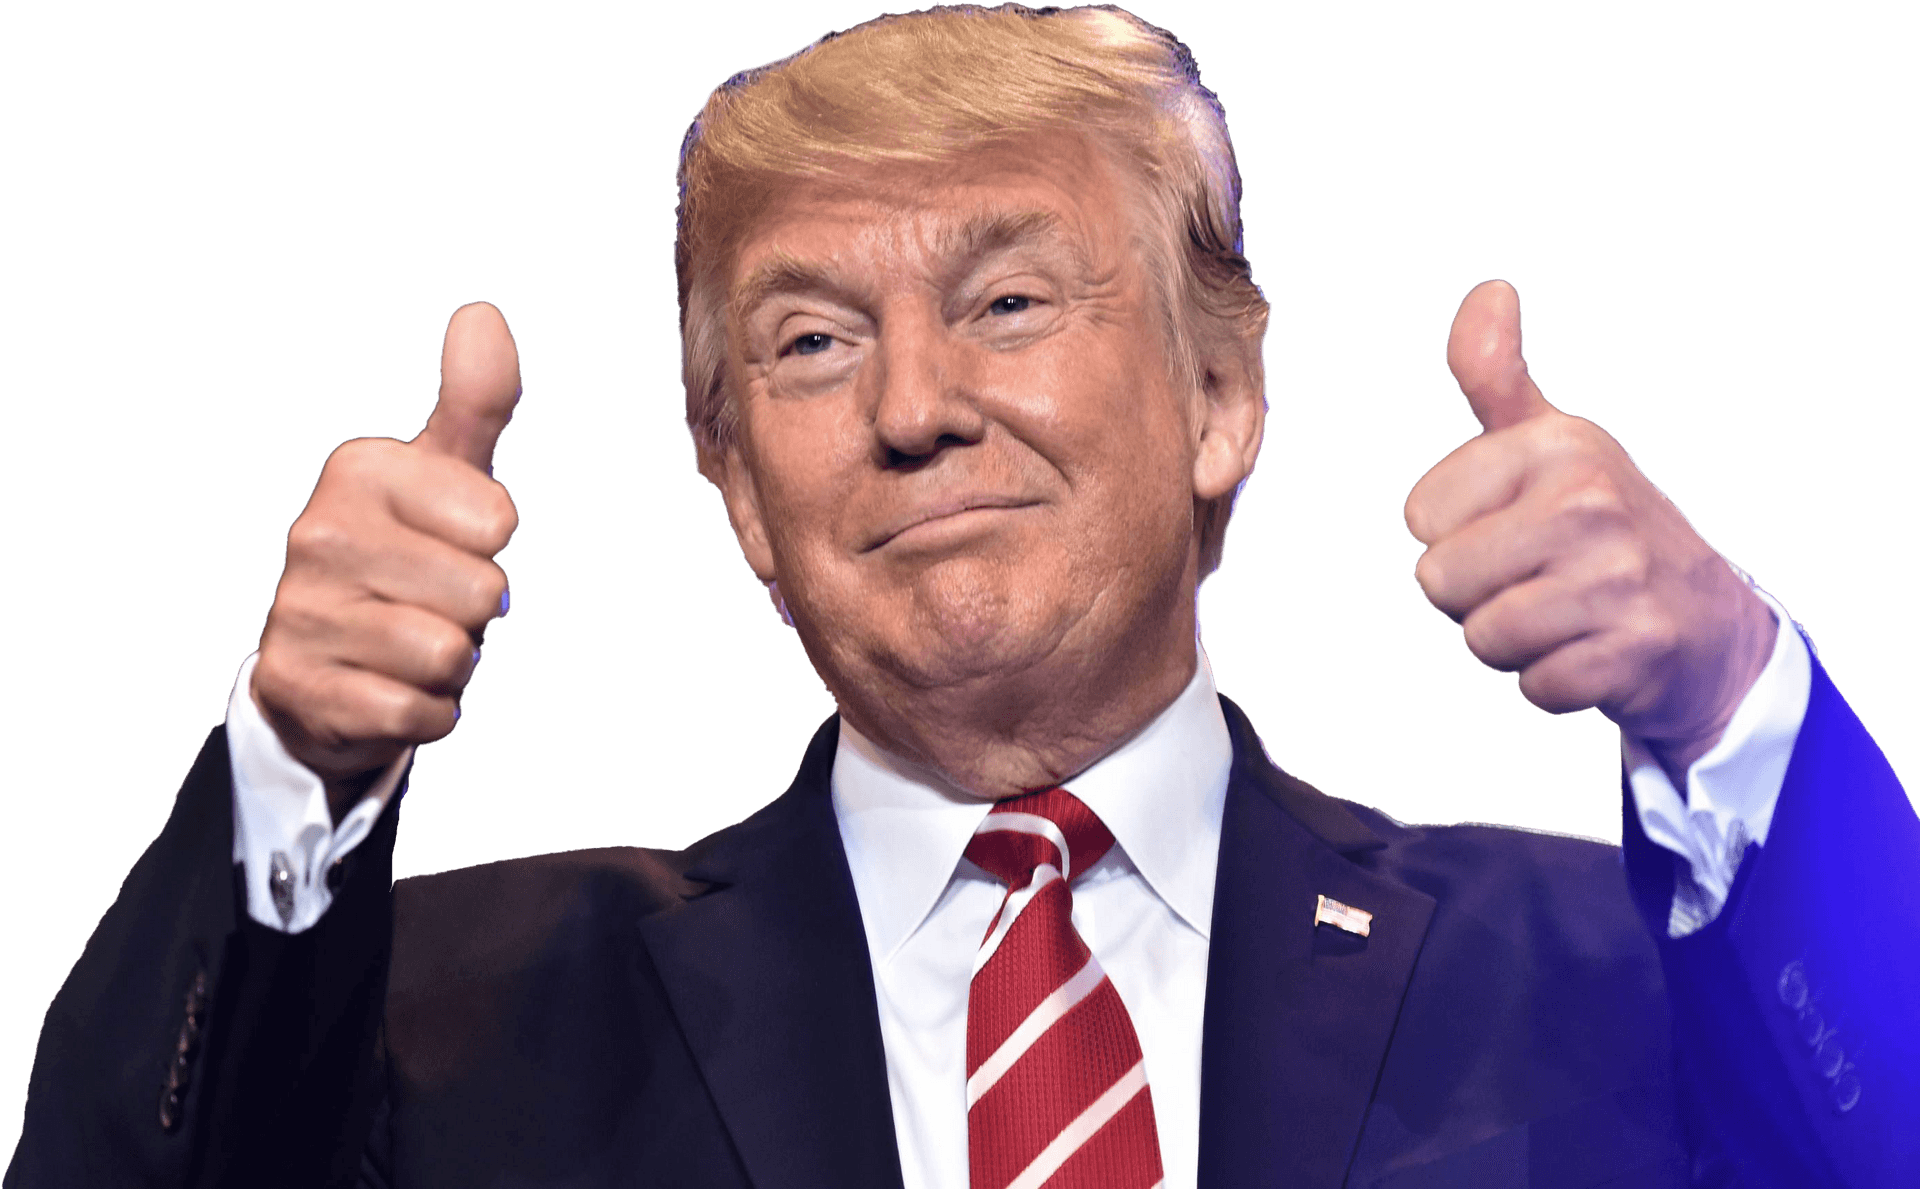 Donald Trump Giving Thumbs Up PNG image